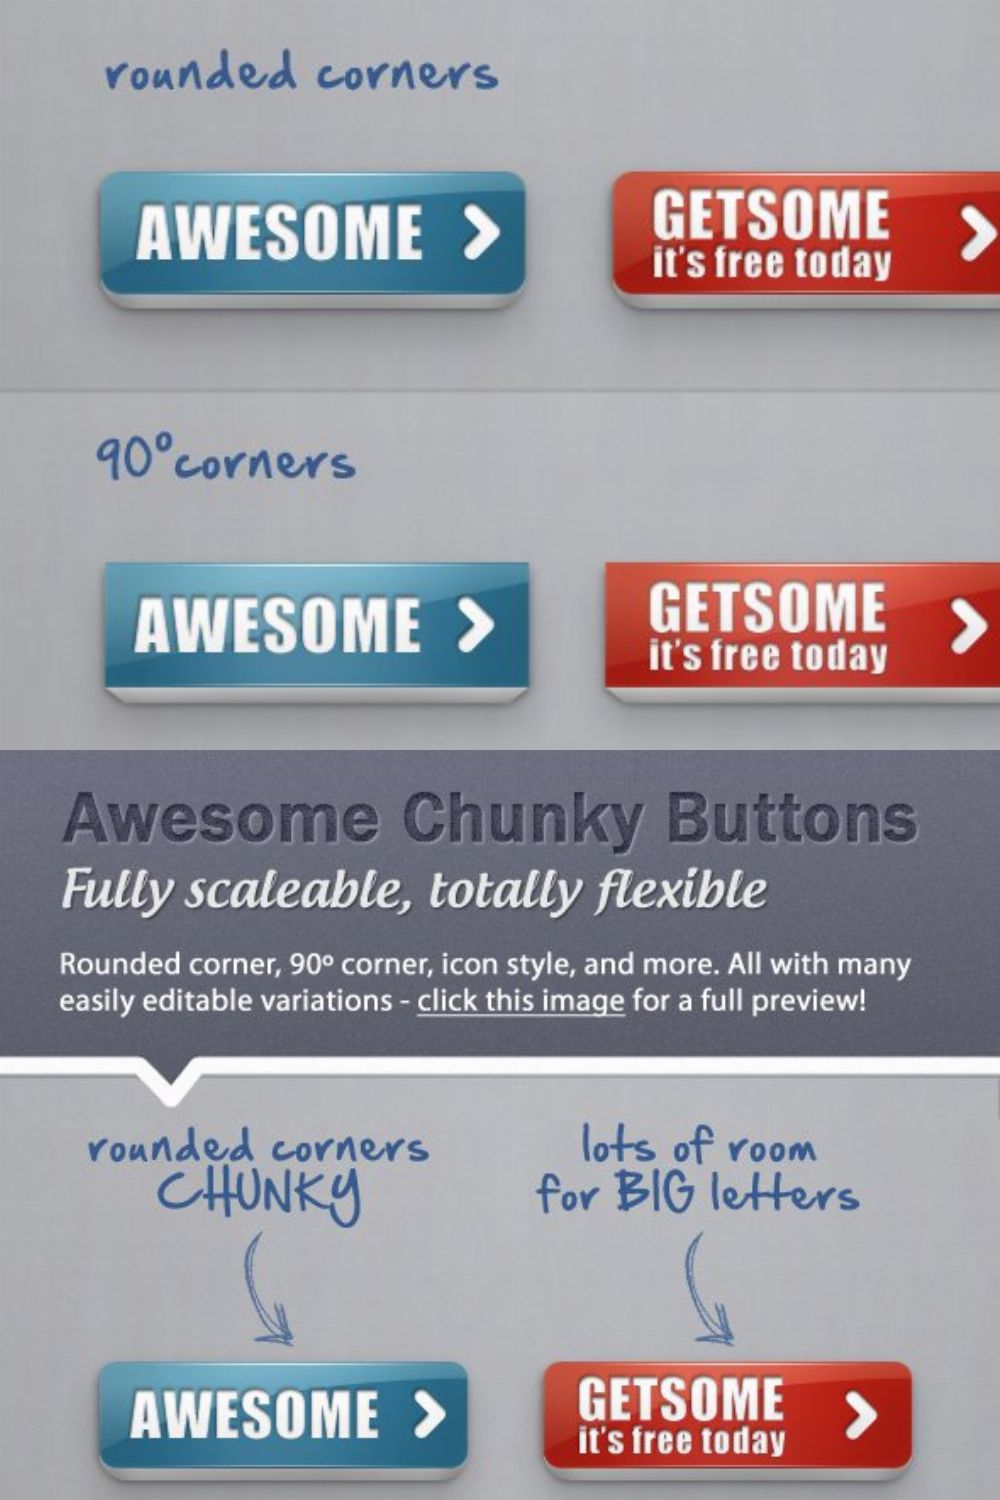 Awesome chunky web buttons pinterest preview image.